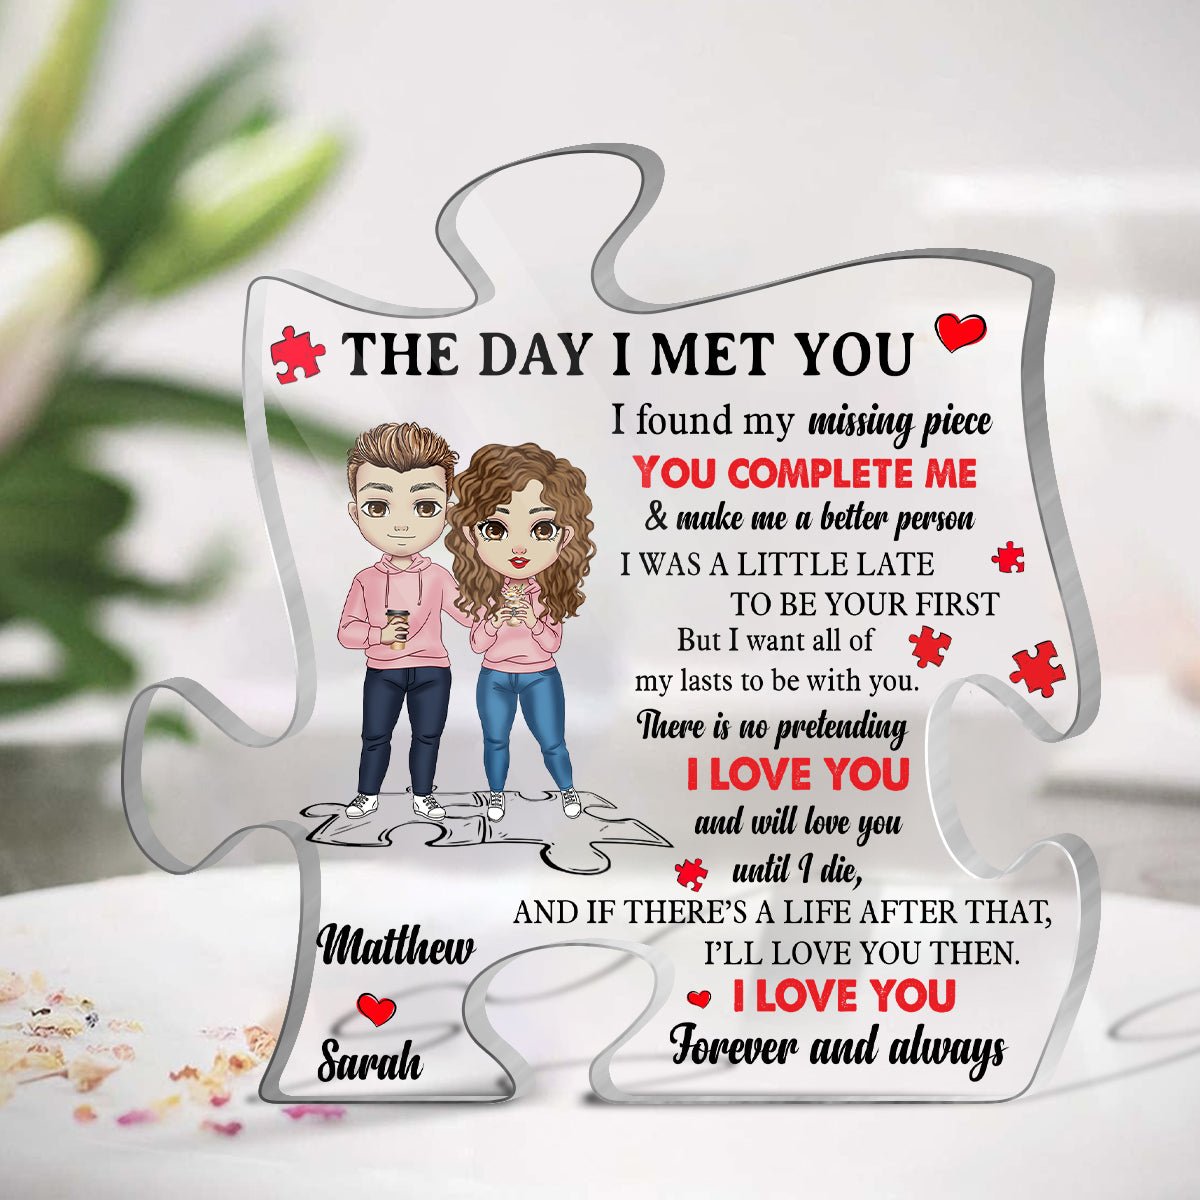 I Love You to Pieces - Acrylic Puzzle Plaque